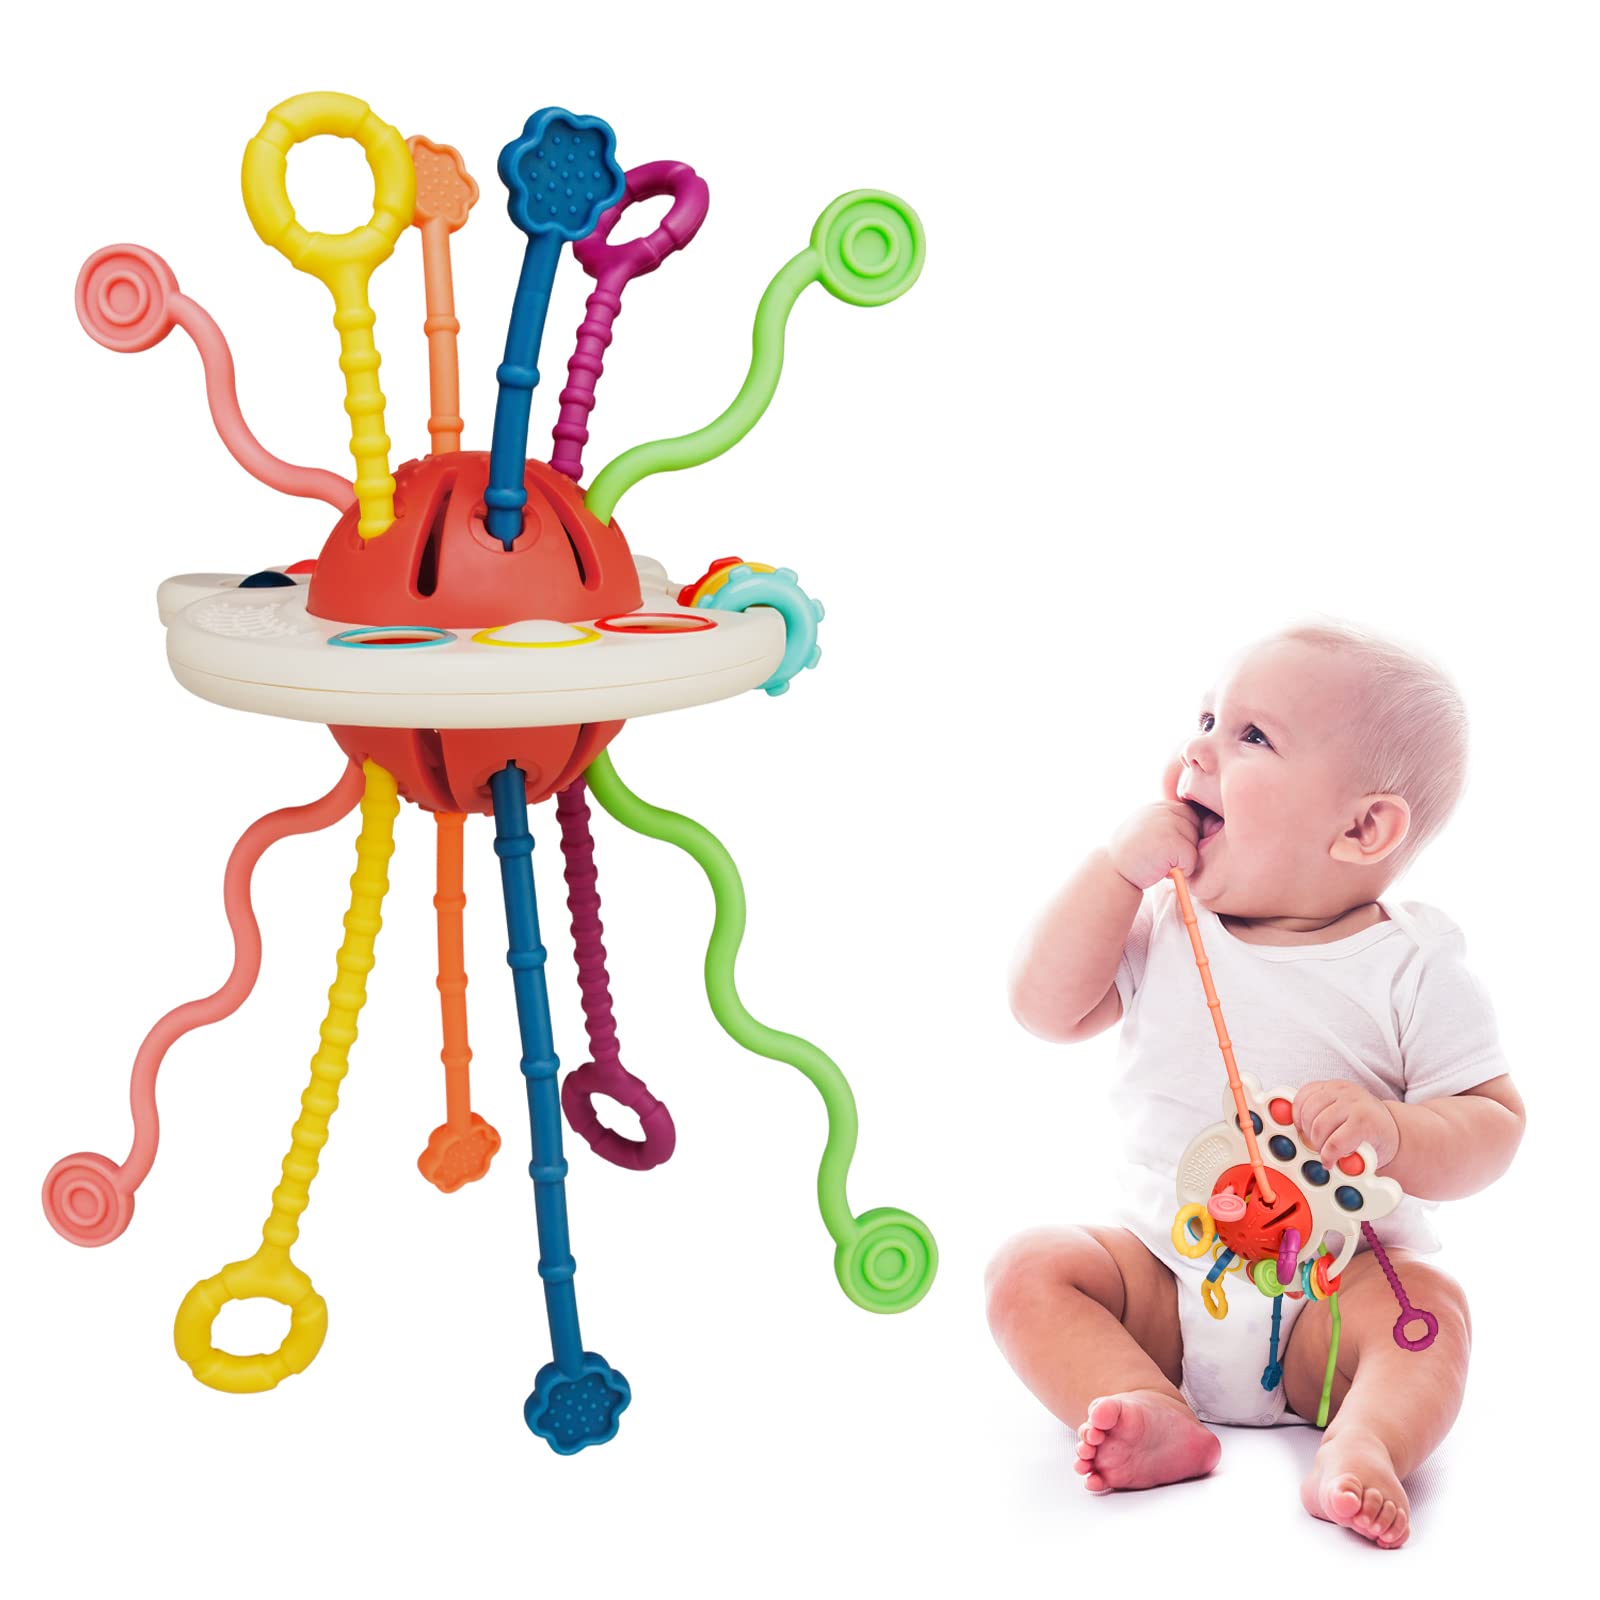 PRAGYM Baby Toys 6 to 12 Months, Sensory & Montessori Toys for 1 Year Old,  Octopus Pull String Toys,…See more PRAGYM Baby Toys 6 to 12 Months, Sensory